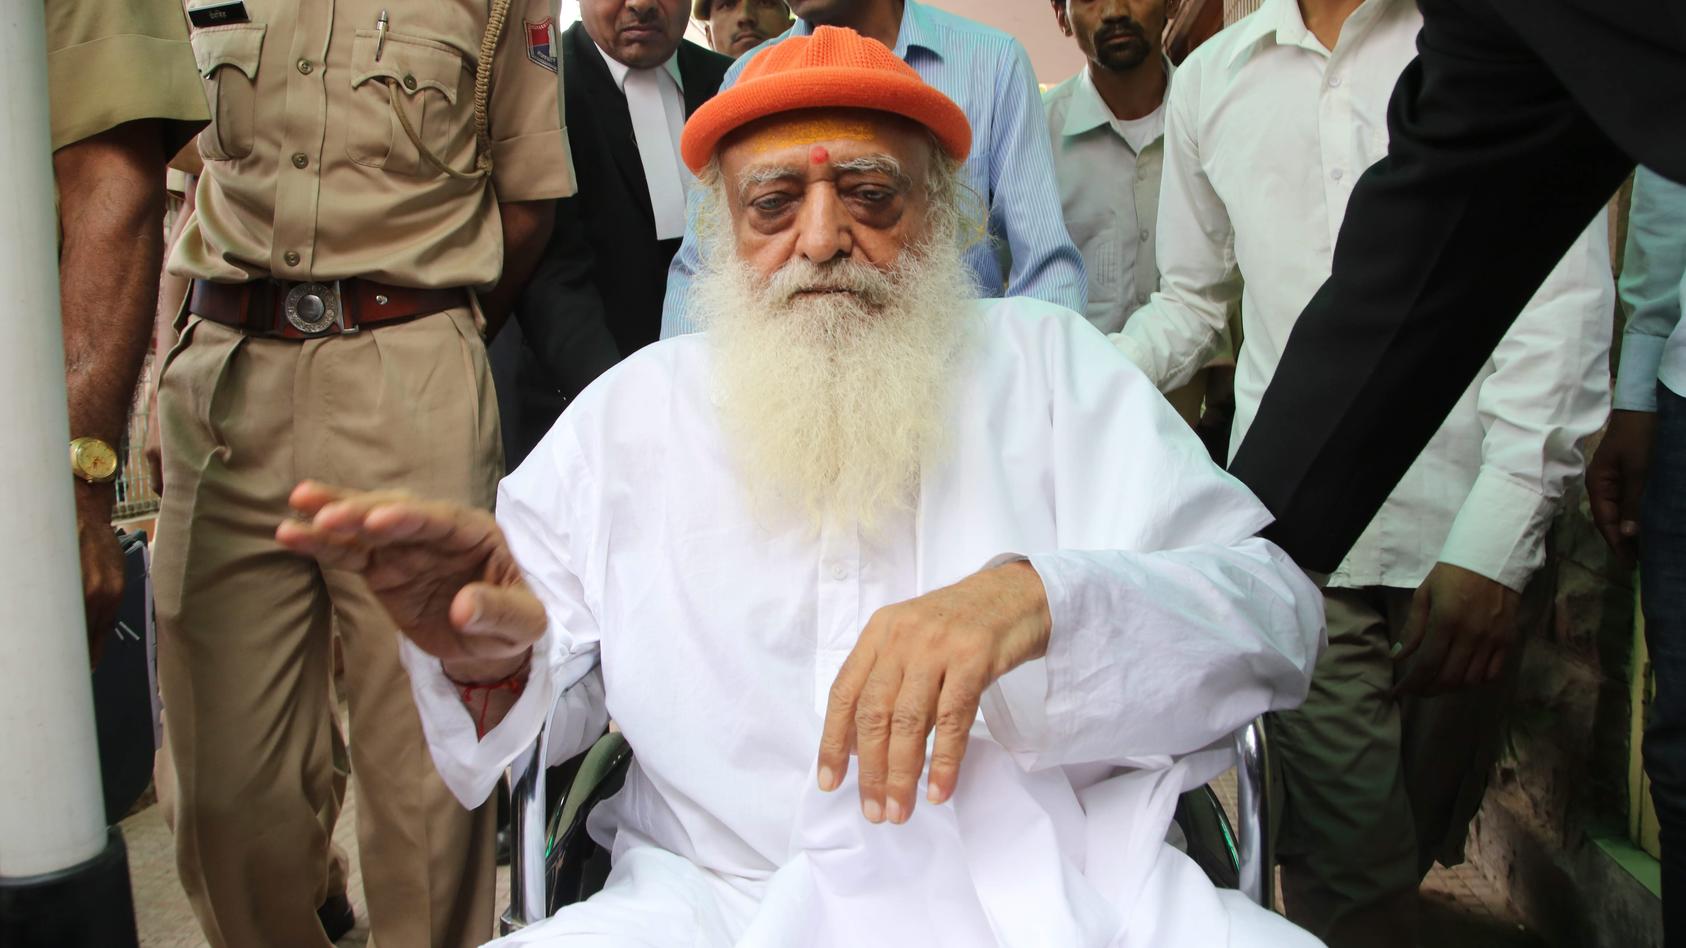 Spiritual leader Asaram Bapu accused in a sexual assault case arrives on wheel chair at the district session court for hearing. (Photo by Sunil Verma / Pacific Press)